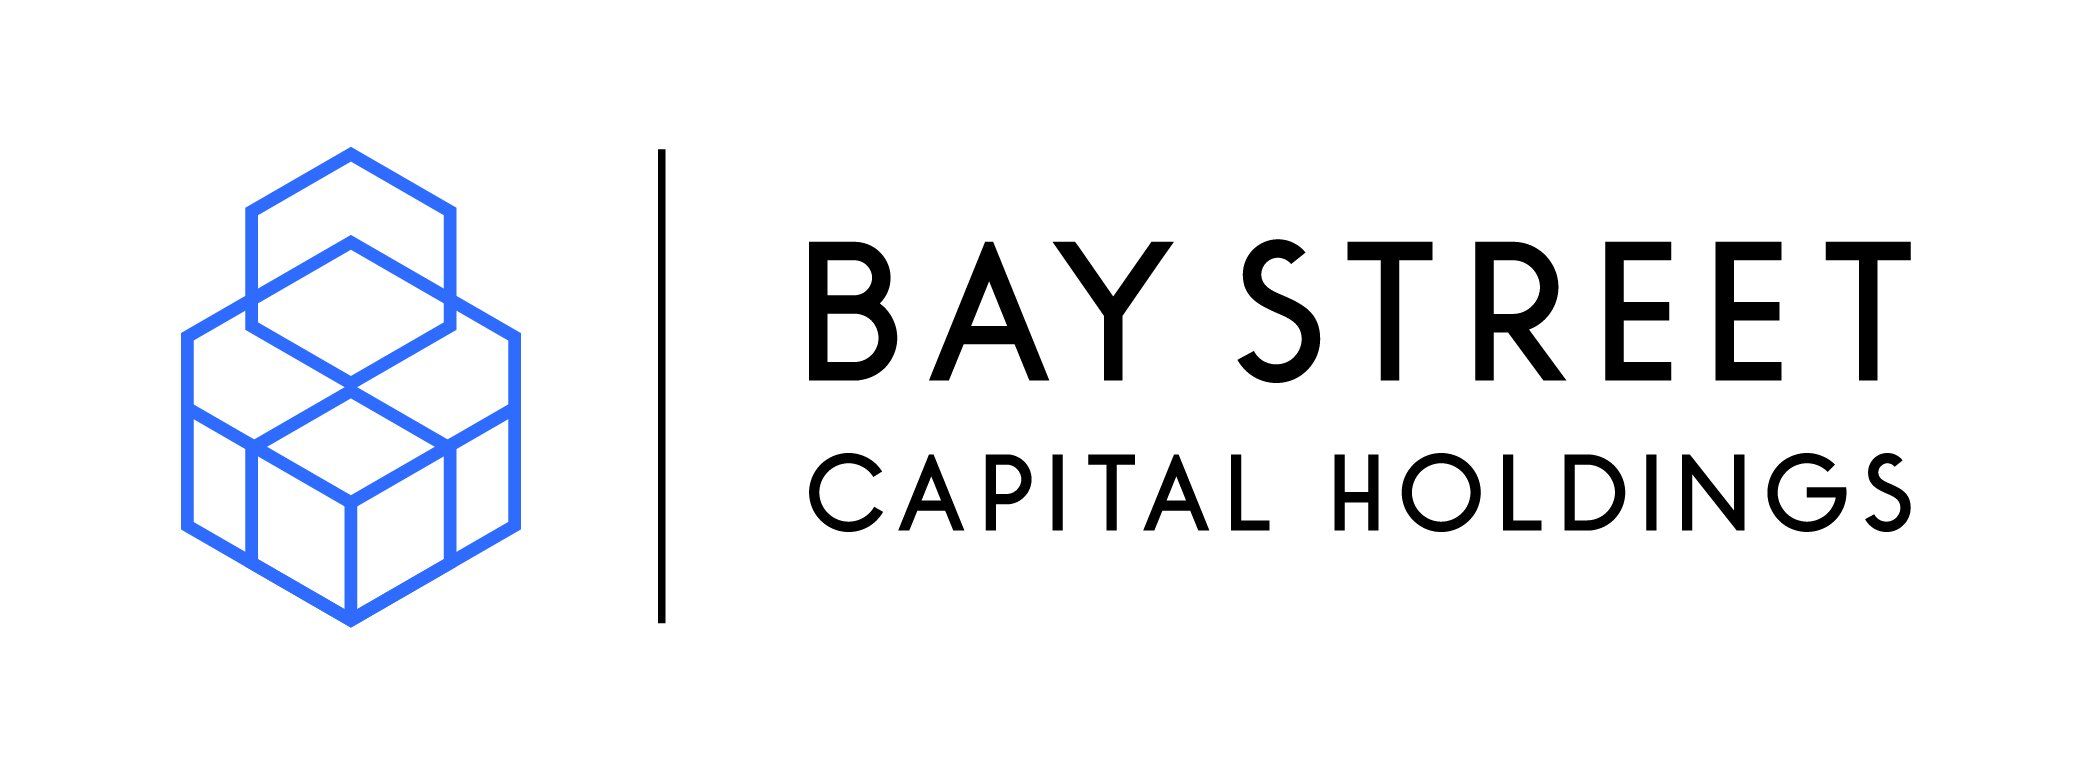 Bay Street Capital Holdings - Investment Firm